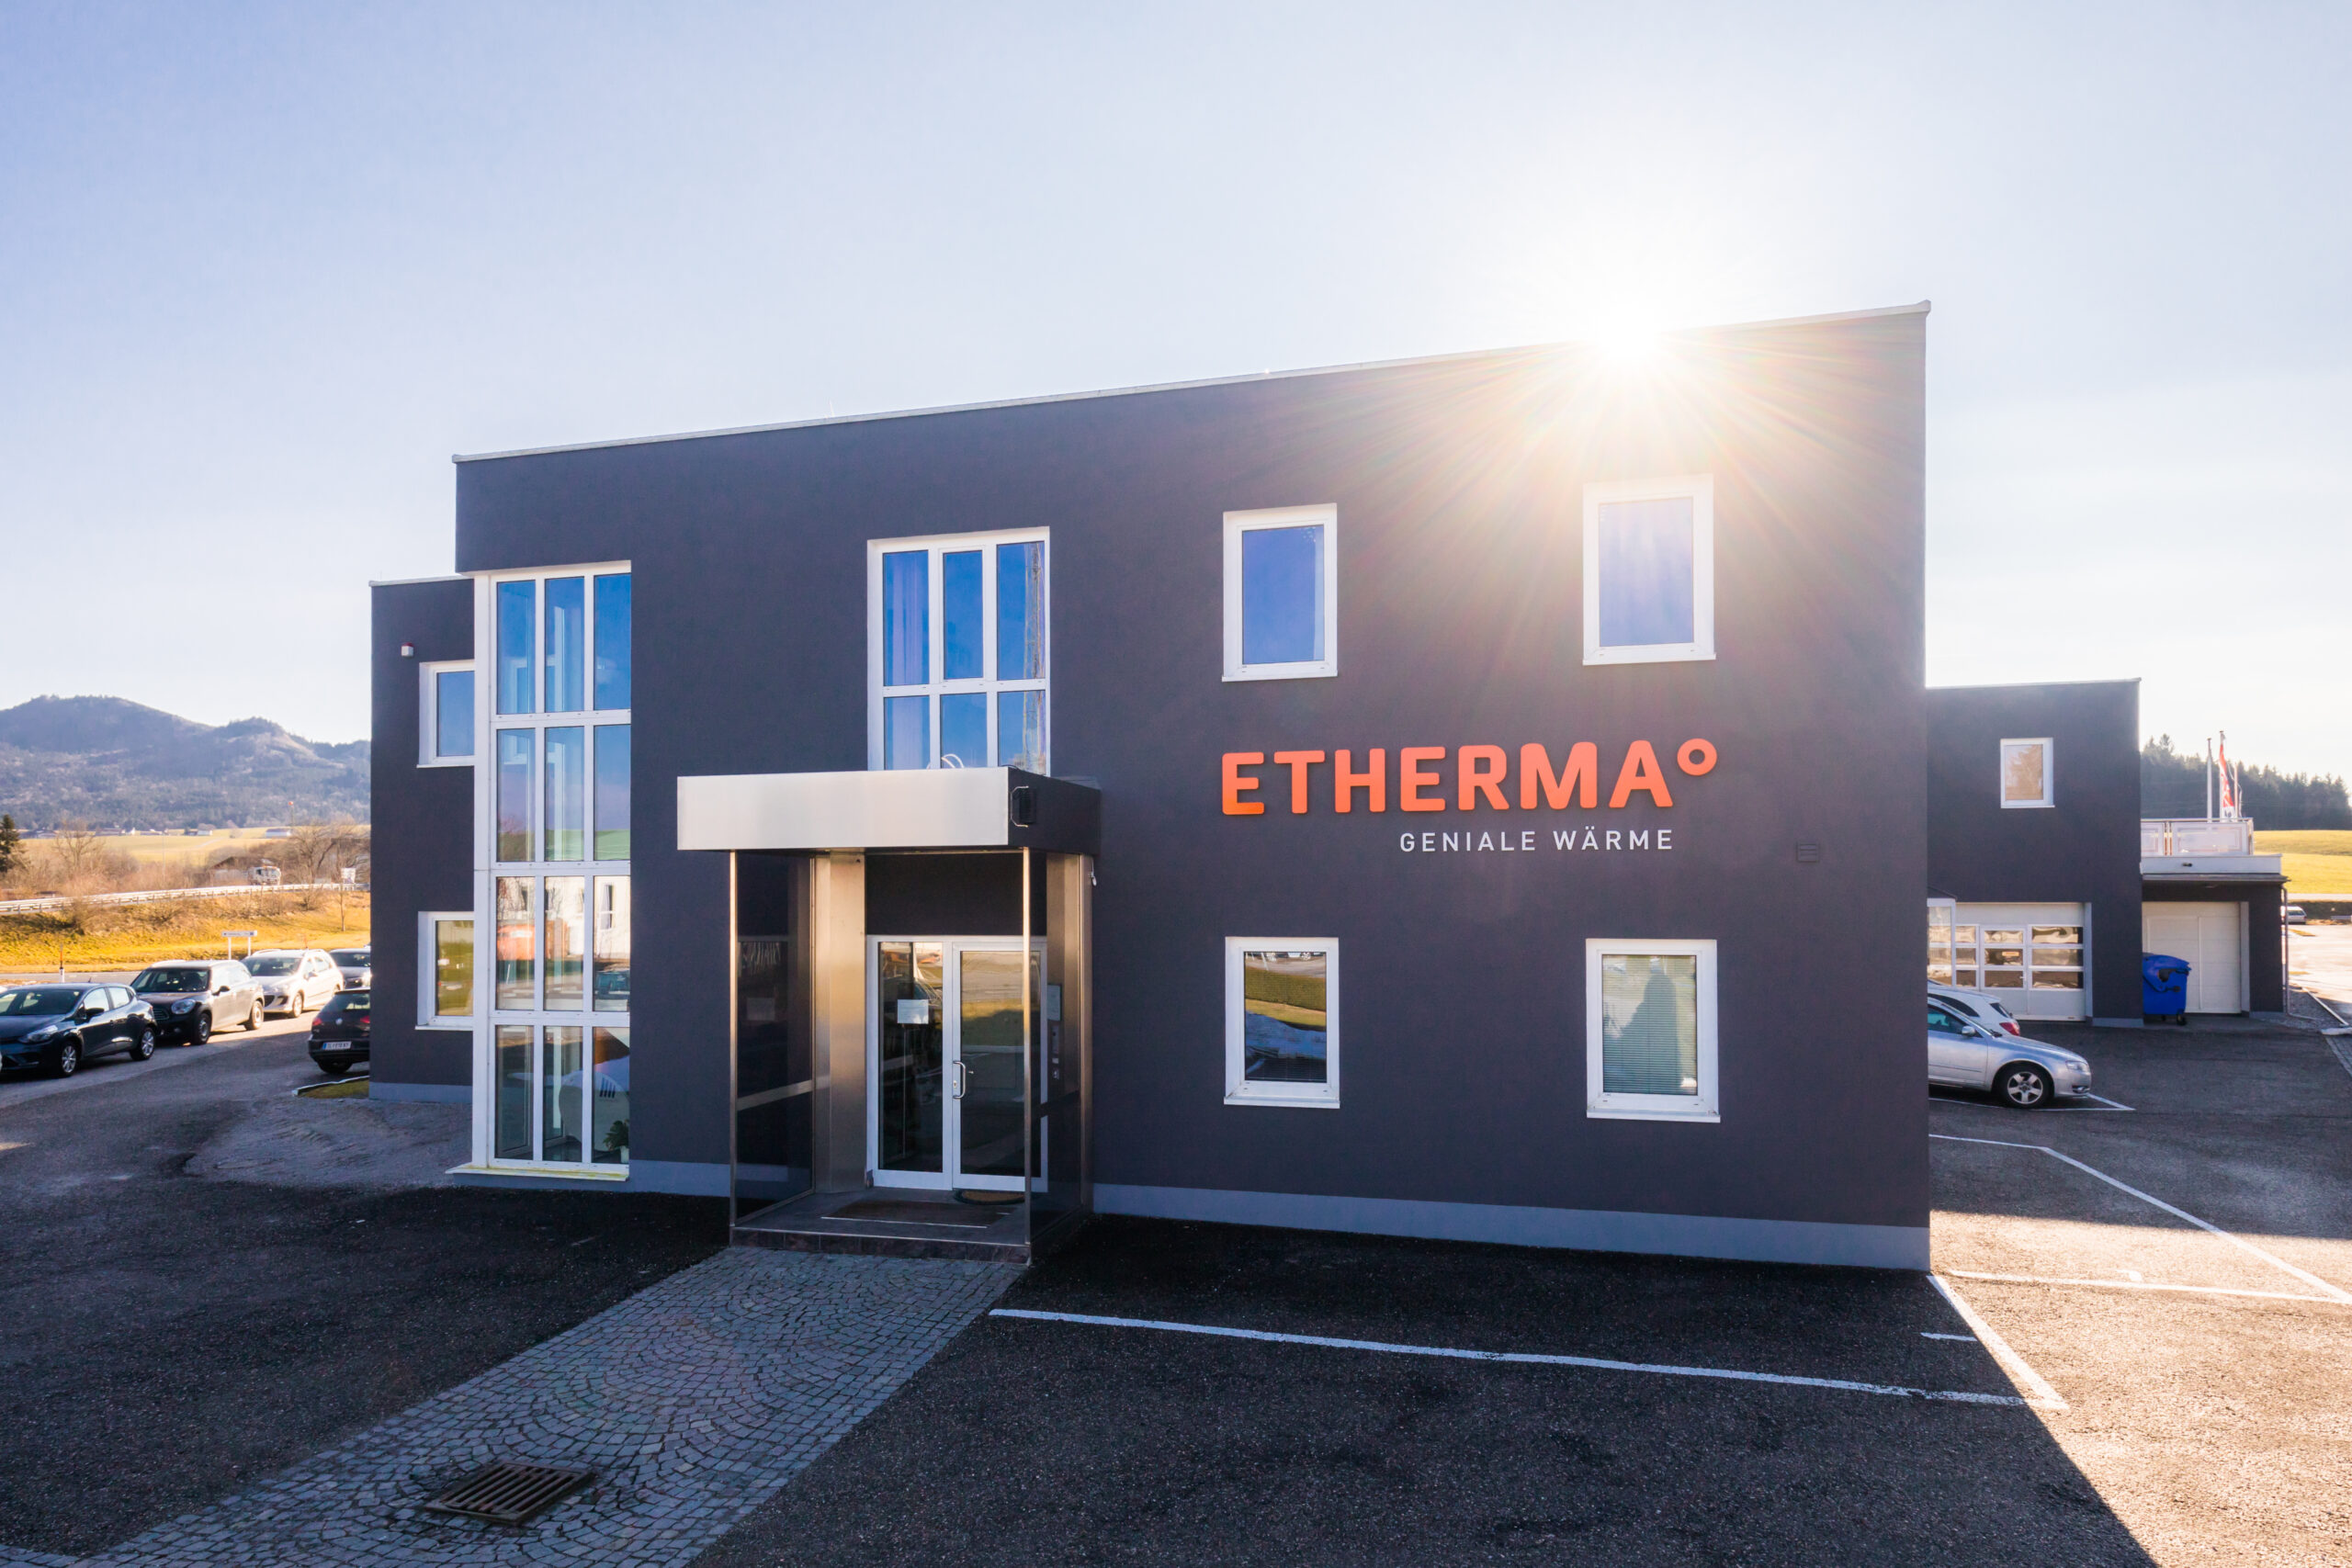 2018-01-31-Etherma-Teil-2-by-Michael-Groessinger-IMG_2089